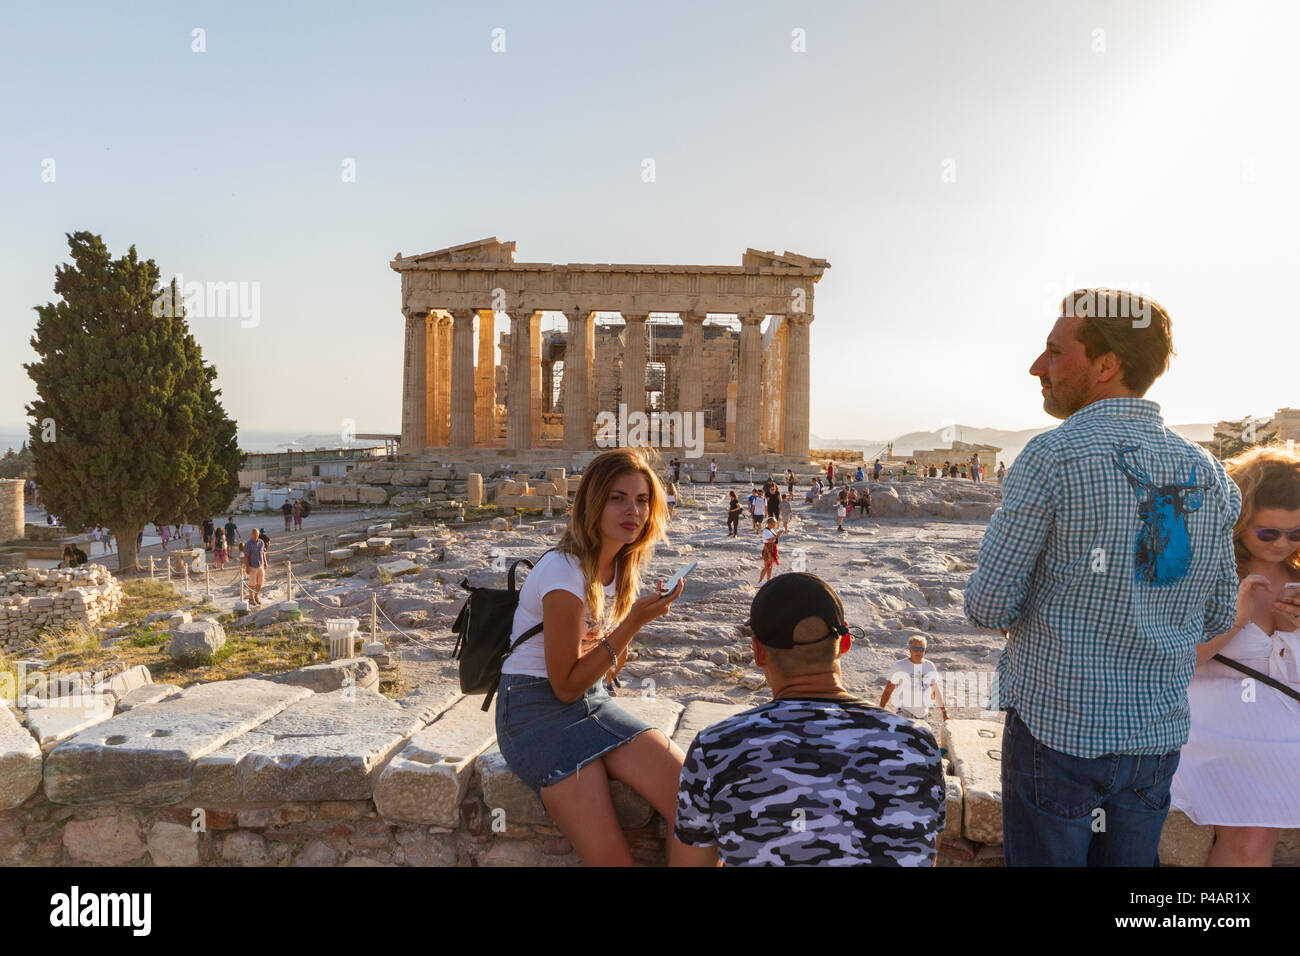 Athens, Greece - June 9, 2018: Tourists posing for photos on the Acropolis against the Parthenon on a summer afternoon Stock Photo